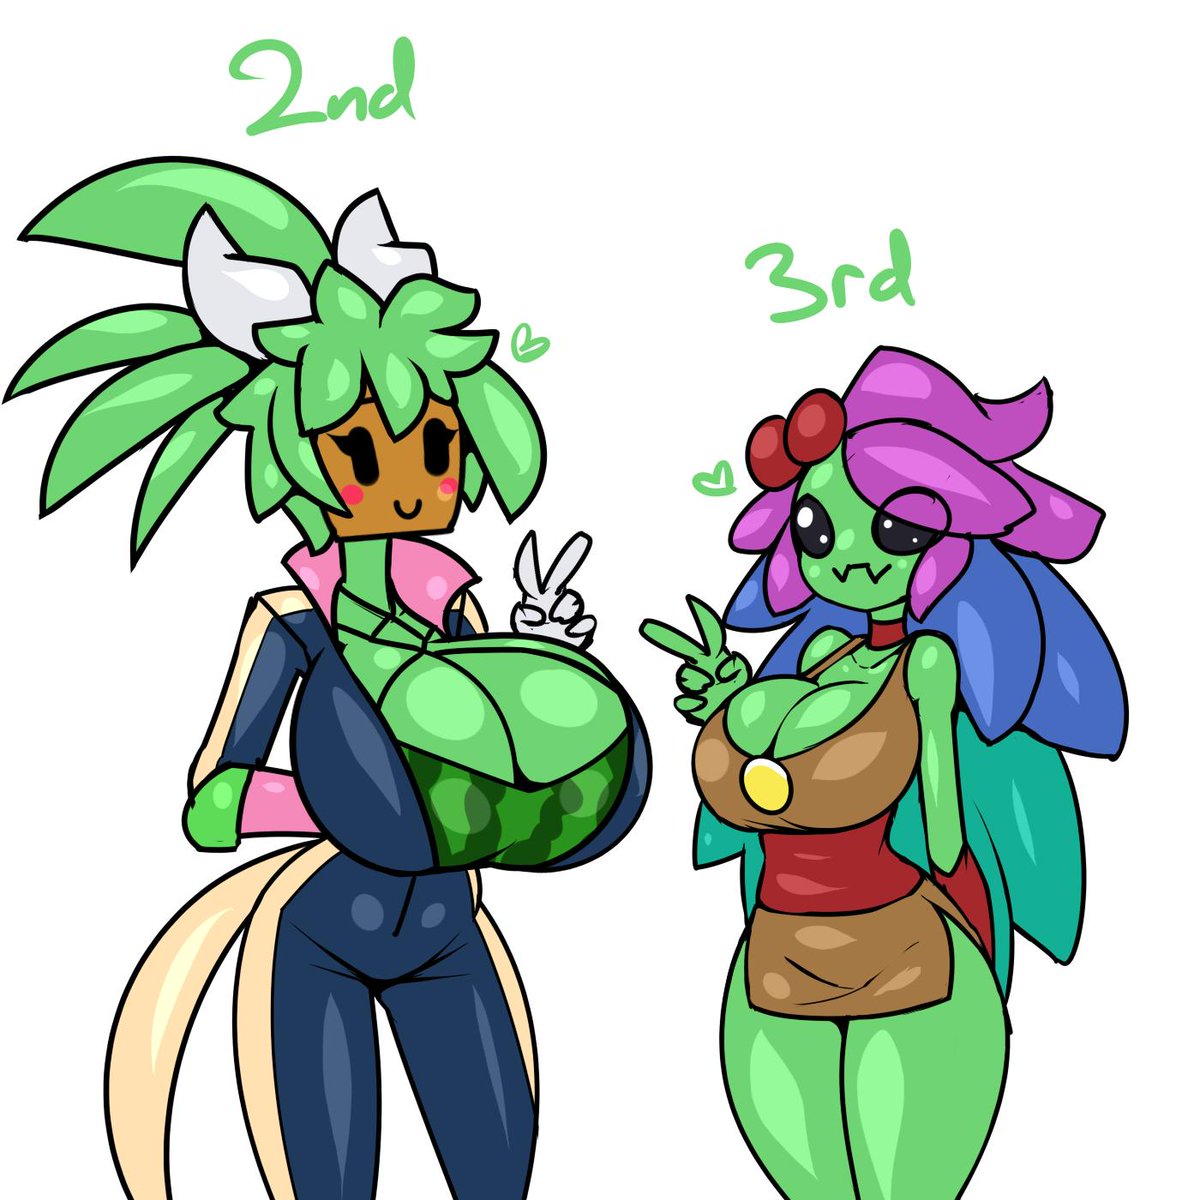 And also there are these losers; Kanna from Blaster Master and Nuru from St...